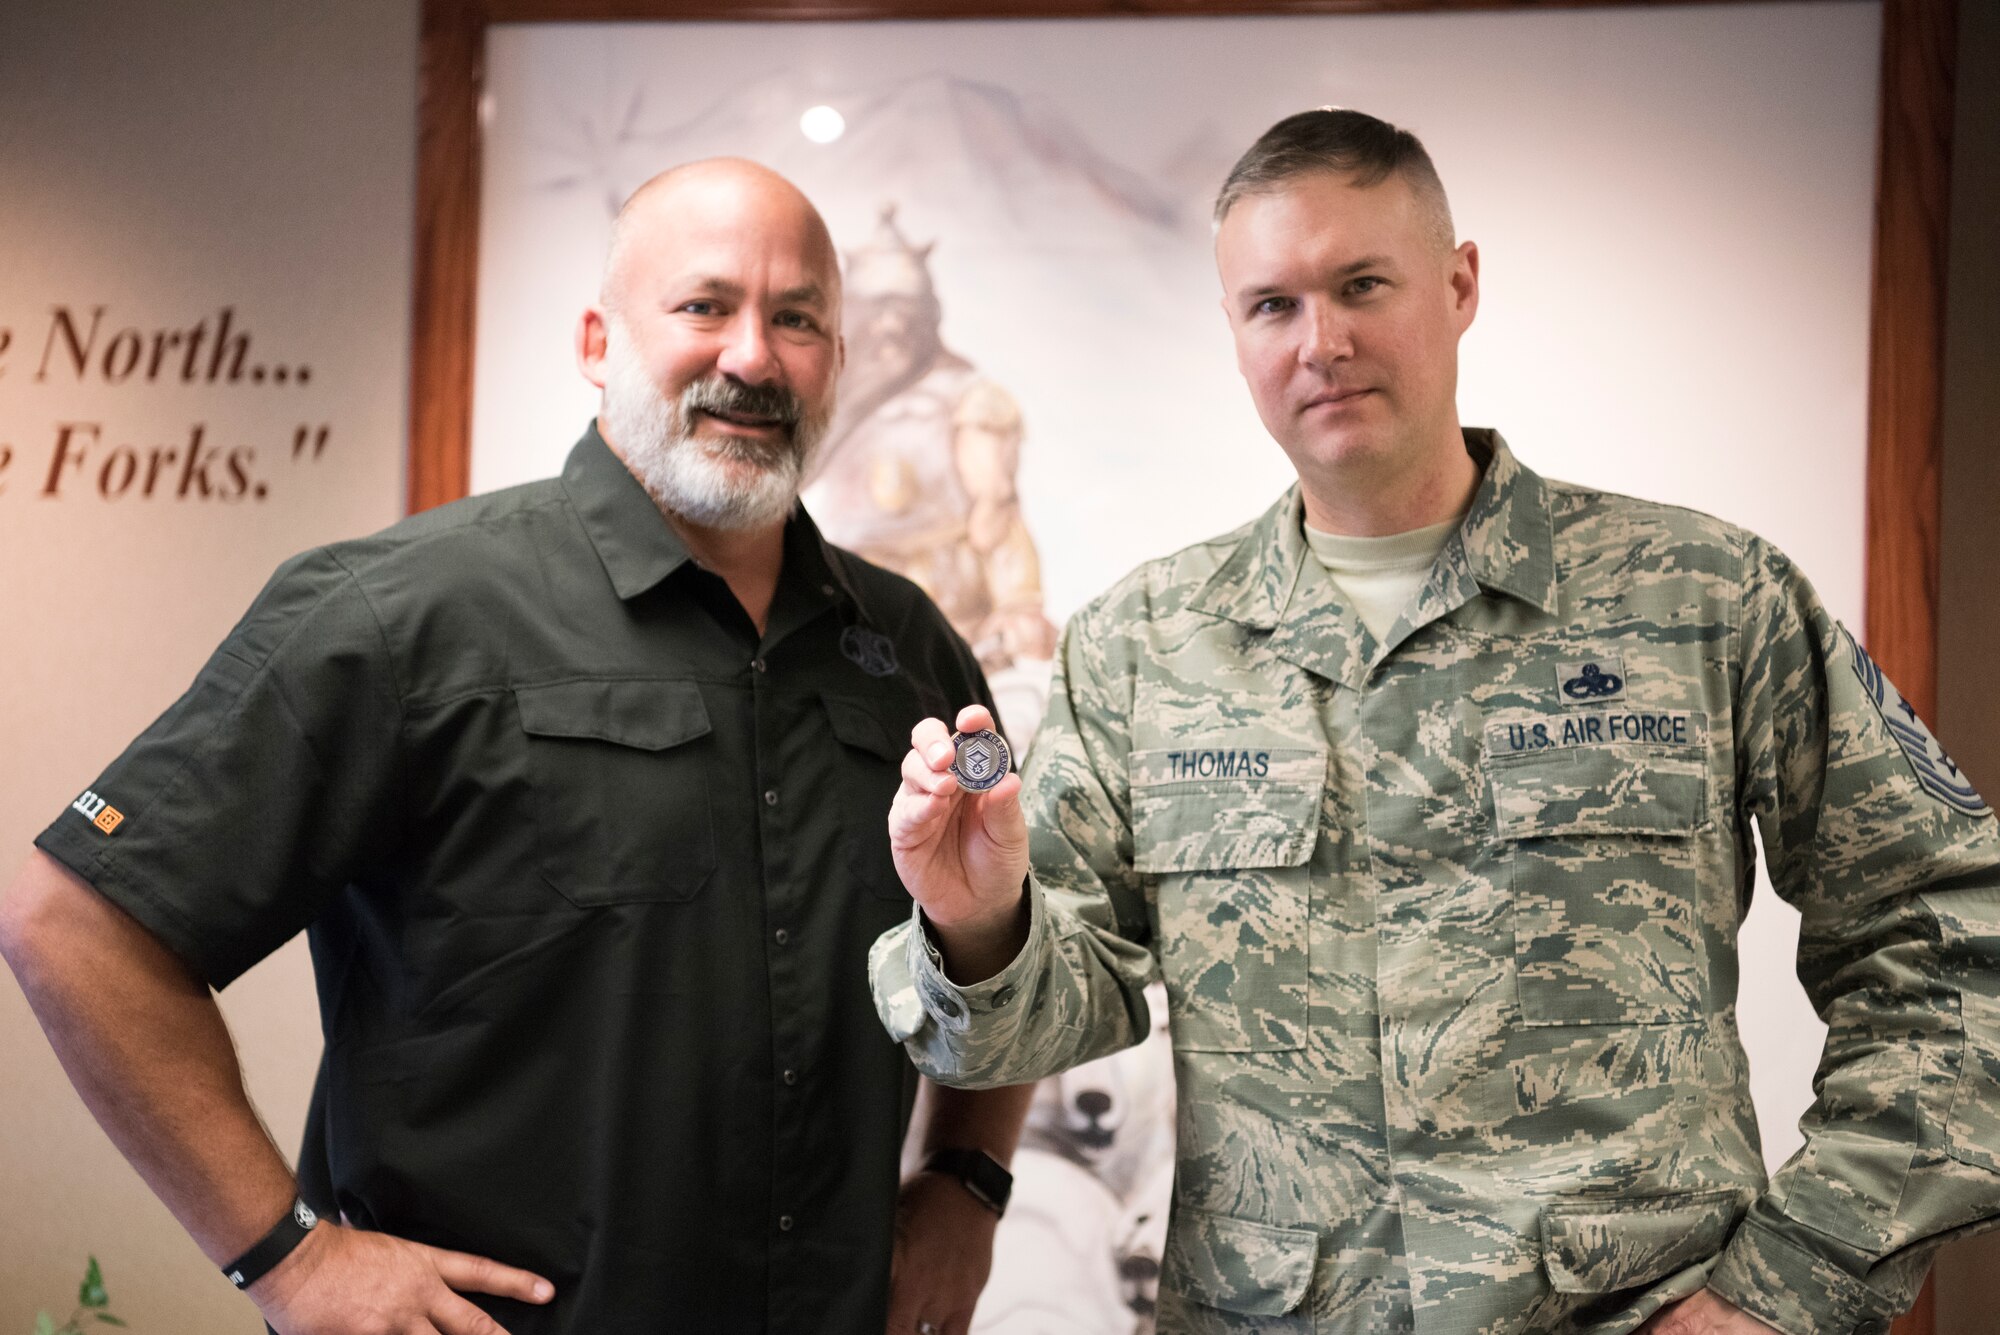 Chief Master Sgt. Brian Thomas, 319th Air Base Wing command chief (right), presents his chief coin alongside mentor and friend, (ret.) Chief Master Sgt. Calvin Markham, March 23, 2018, at Grand Forks Air Force Base, N.D. Markham gifted Thomas this coin when Thomas pinned on chief in 2013. (U.S. Air Force photo by Airman 1st Class Elijaih Tiggs)